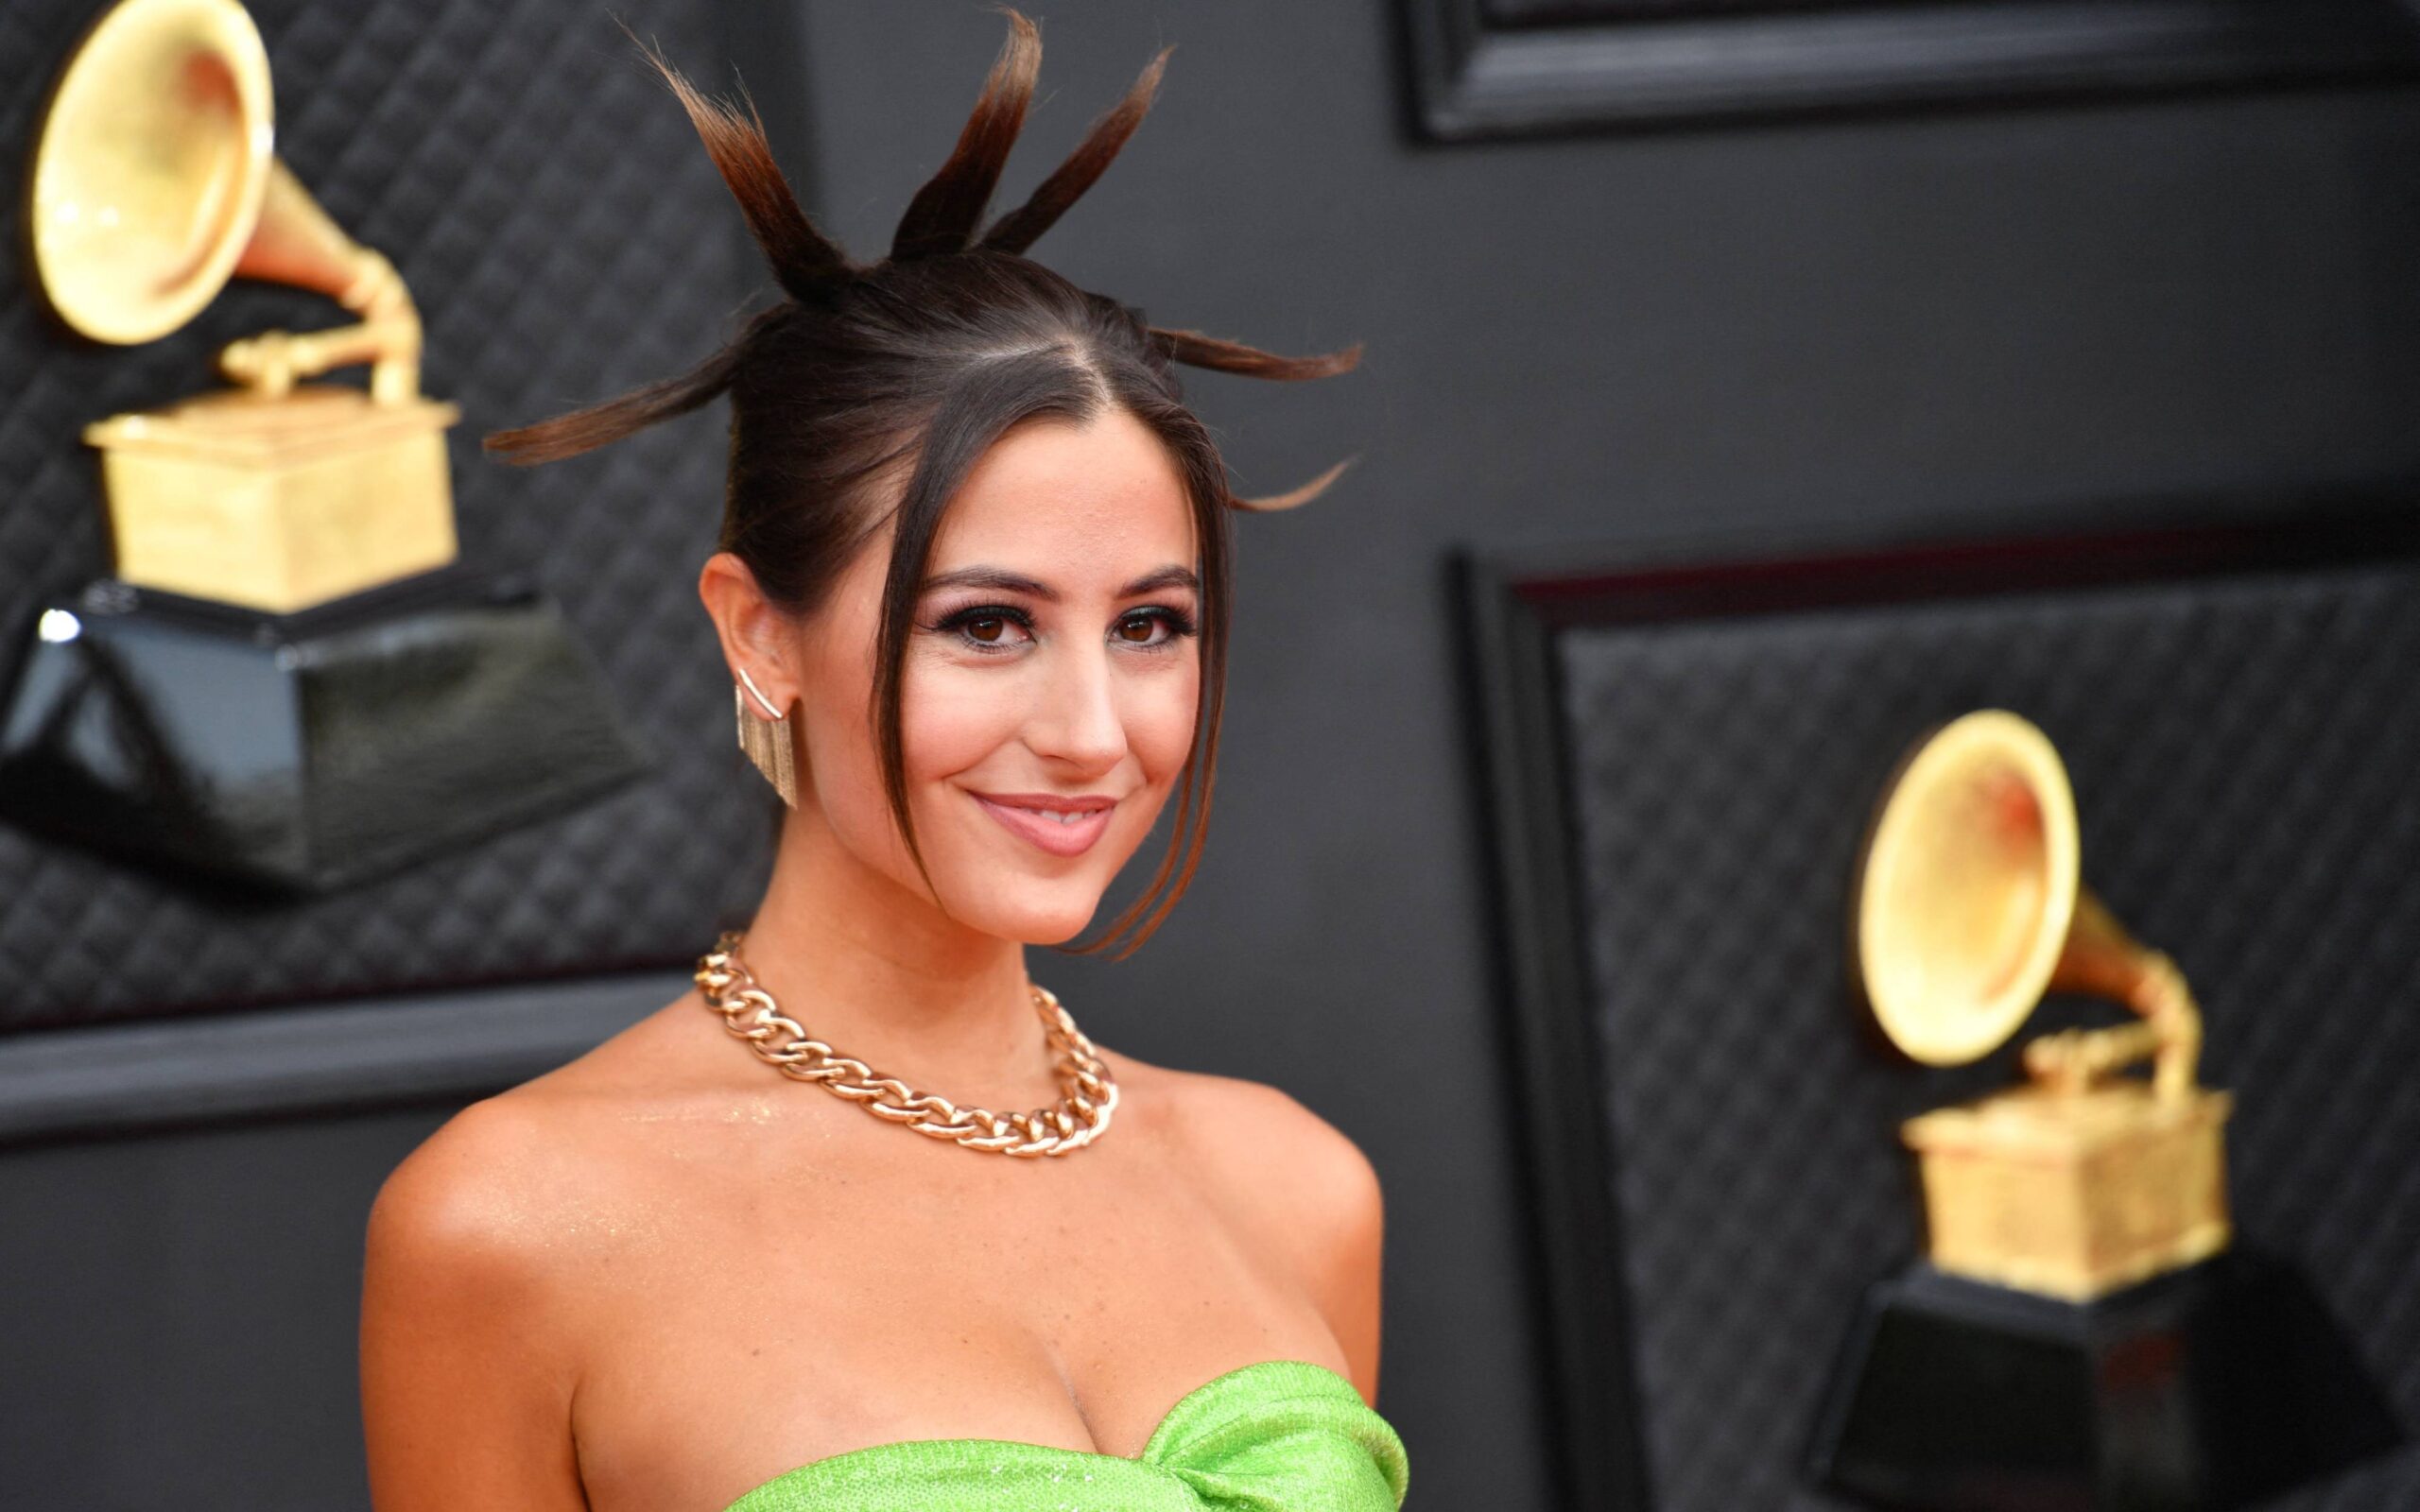 nineties-era-spiky-updos-made-a-comeback-at-the-grammys